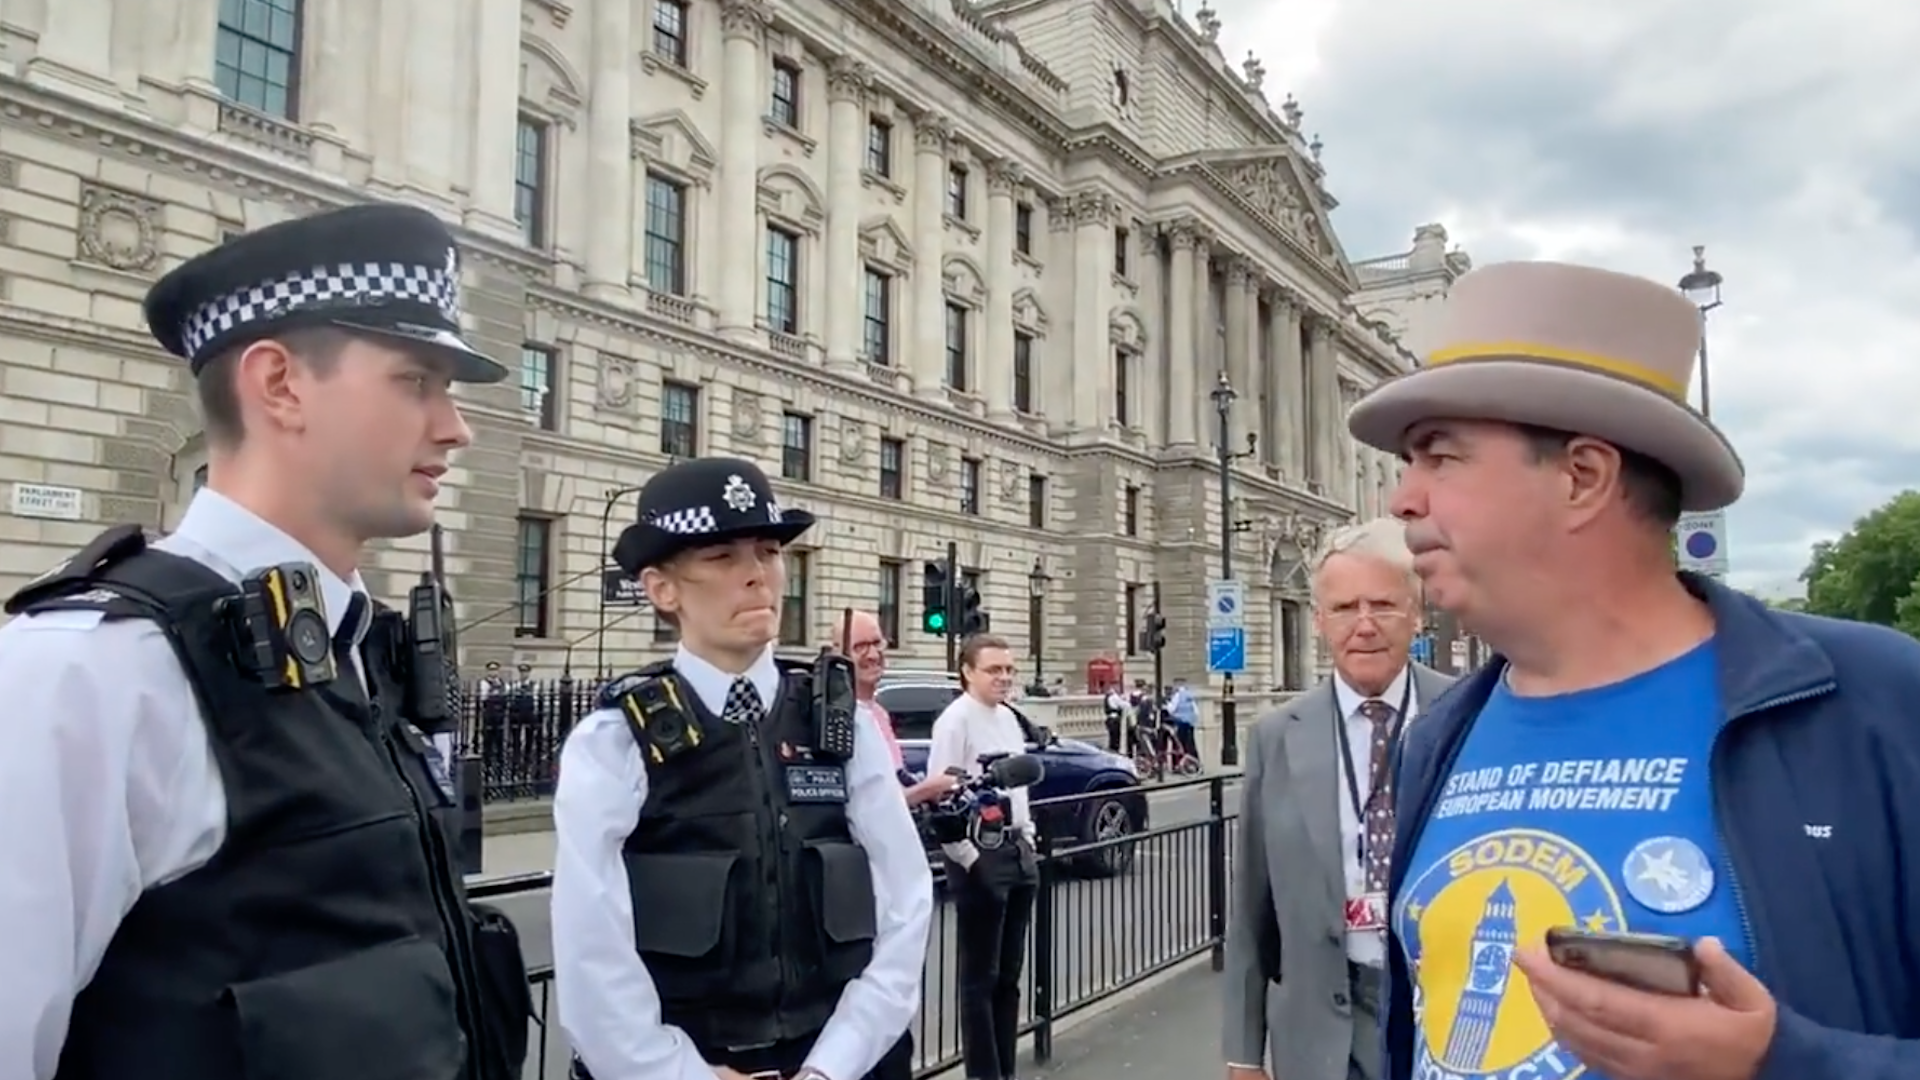 Police speak to Steve Bray before seizing his amplifiers outside Parliament